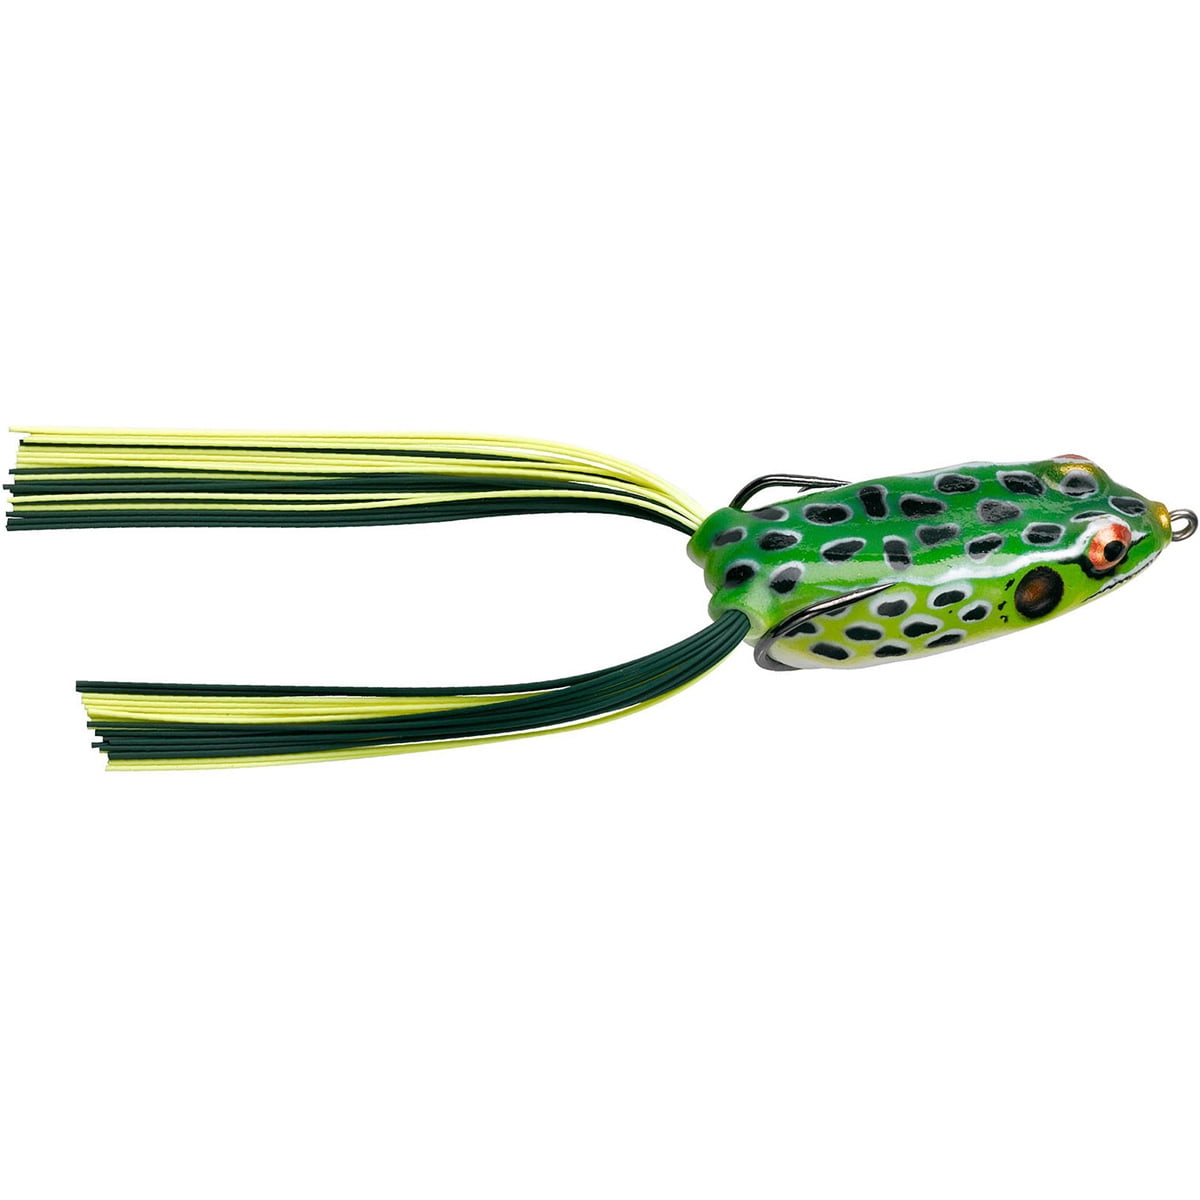 BOOYAH Pad Crasher Hollow Body Frog Leopard Frog 2 1/2 1/2 oz. 